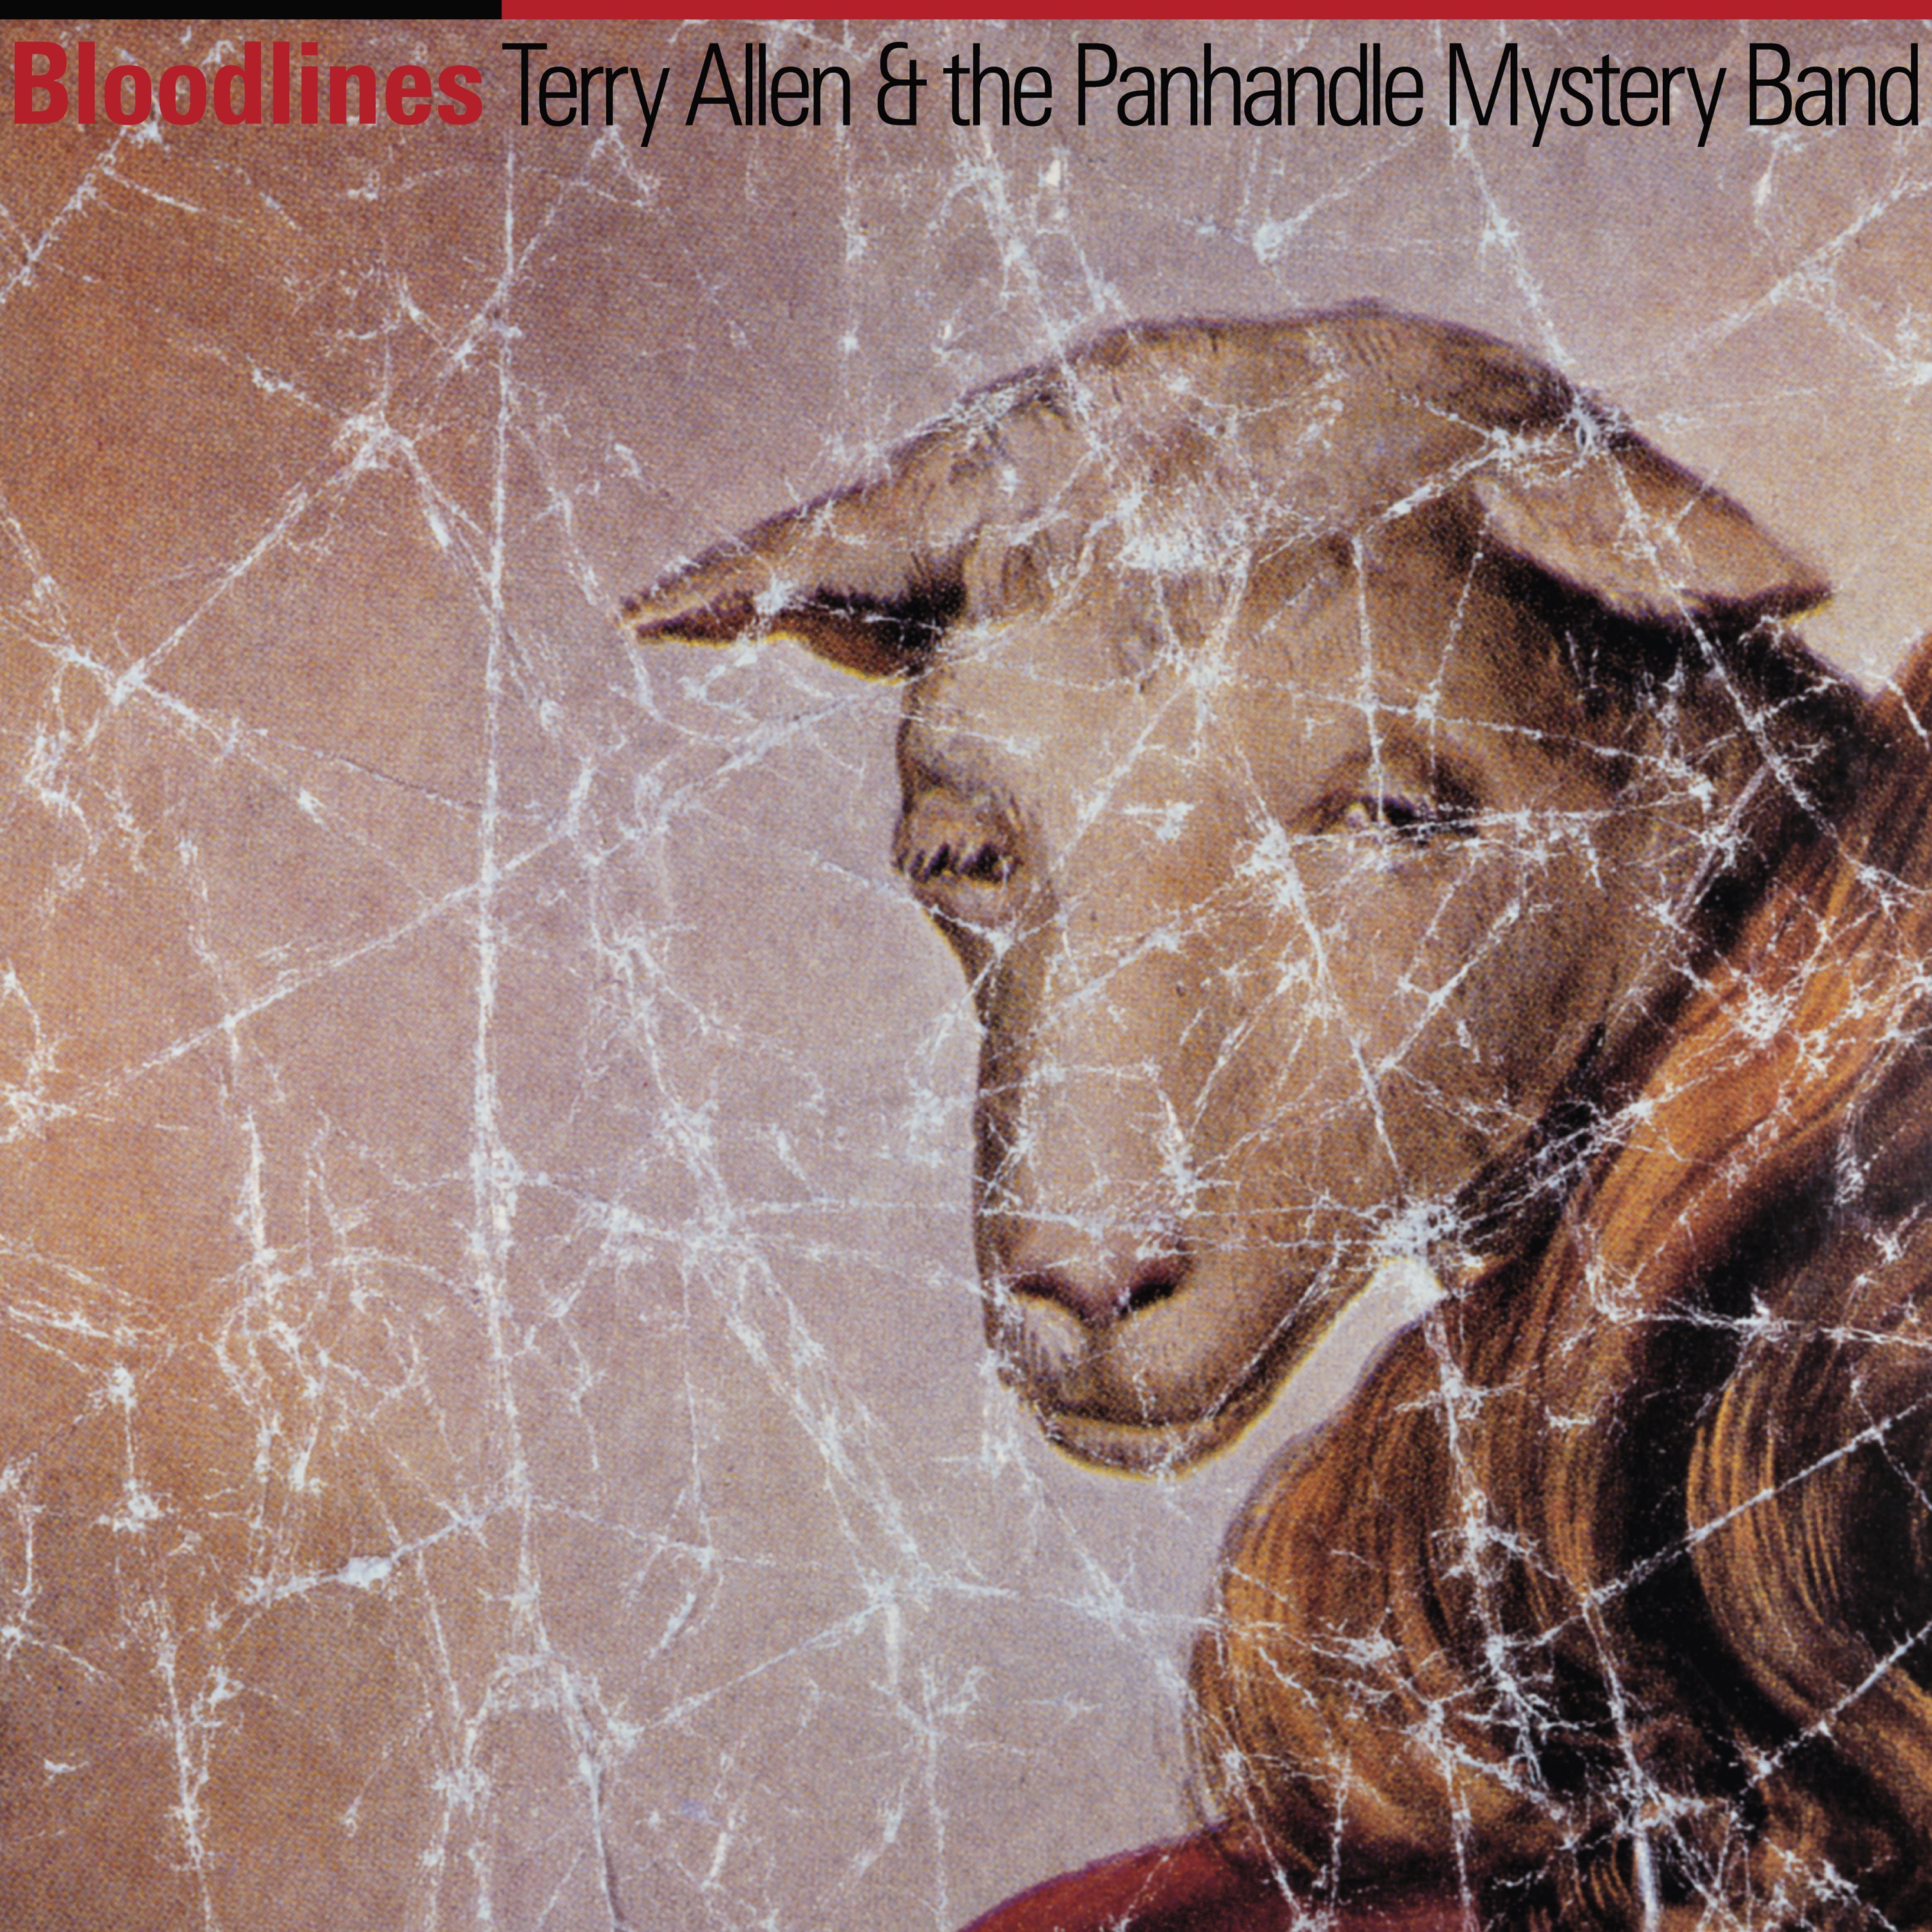 Terry Allen and the Panhandle Mystery Band - Bloodlines